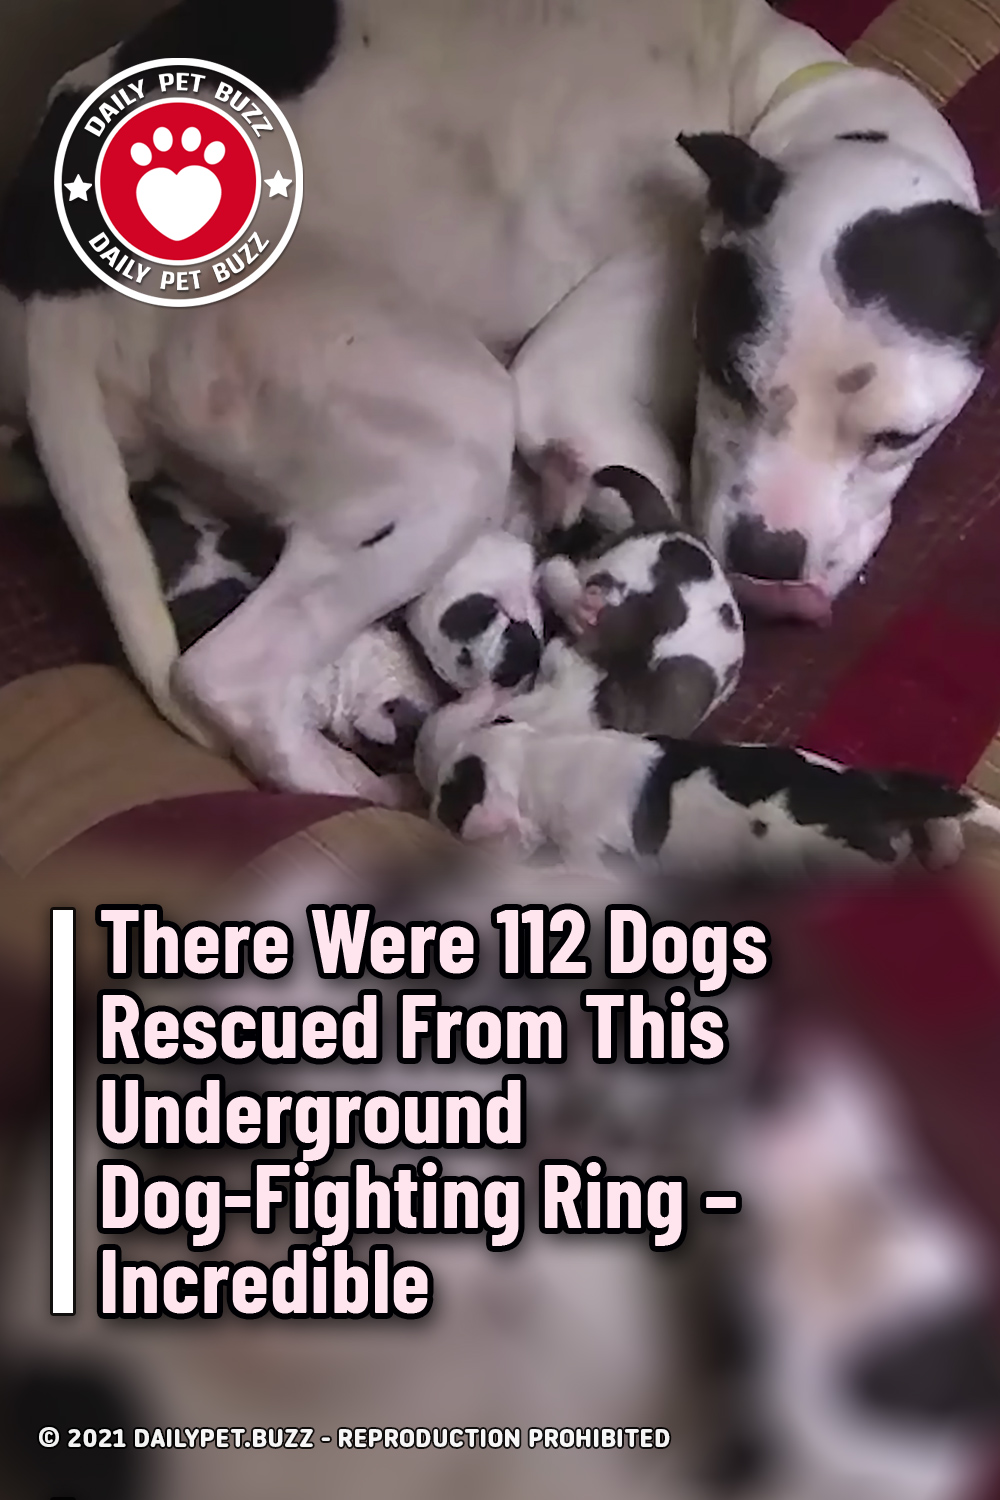 There Were 112 Dogs Rescued From This Underground Dog-Fighting Ring – Incredible